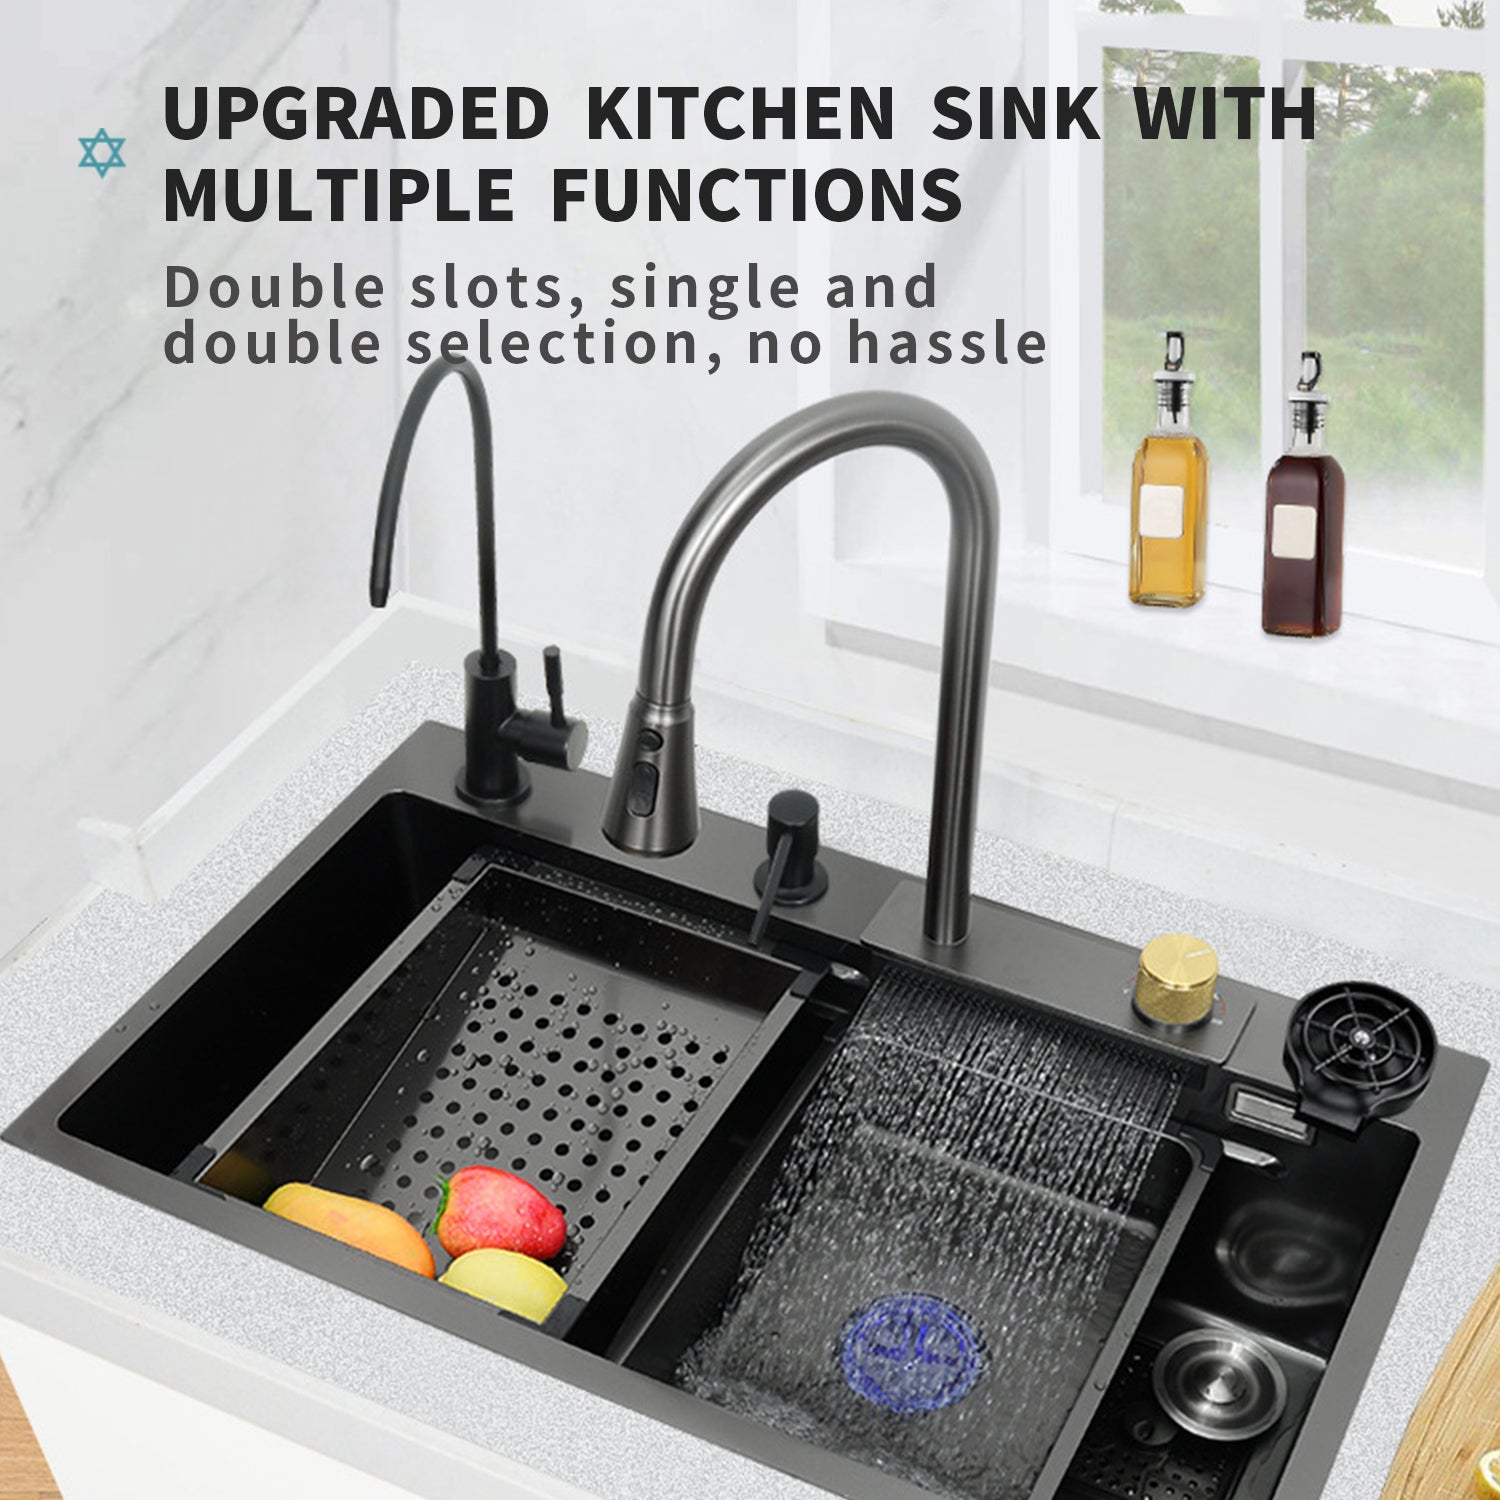 Pehohe Kitchen Sinks Waterfall Kitchen Sink Set 304 Stainless Steel Nano  Sink Home Sink Vegetable Basin with Pull-Out Faucet,Add Pressurized Sink